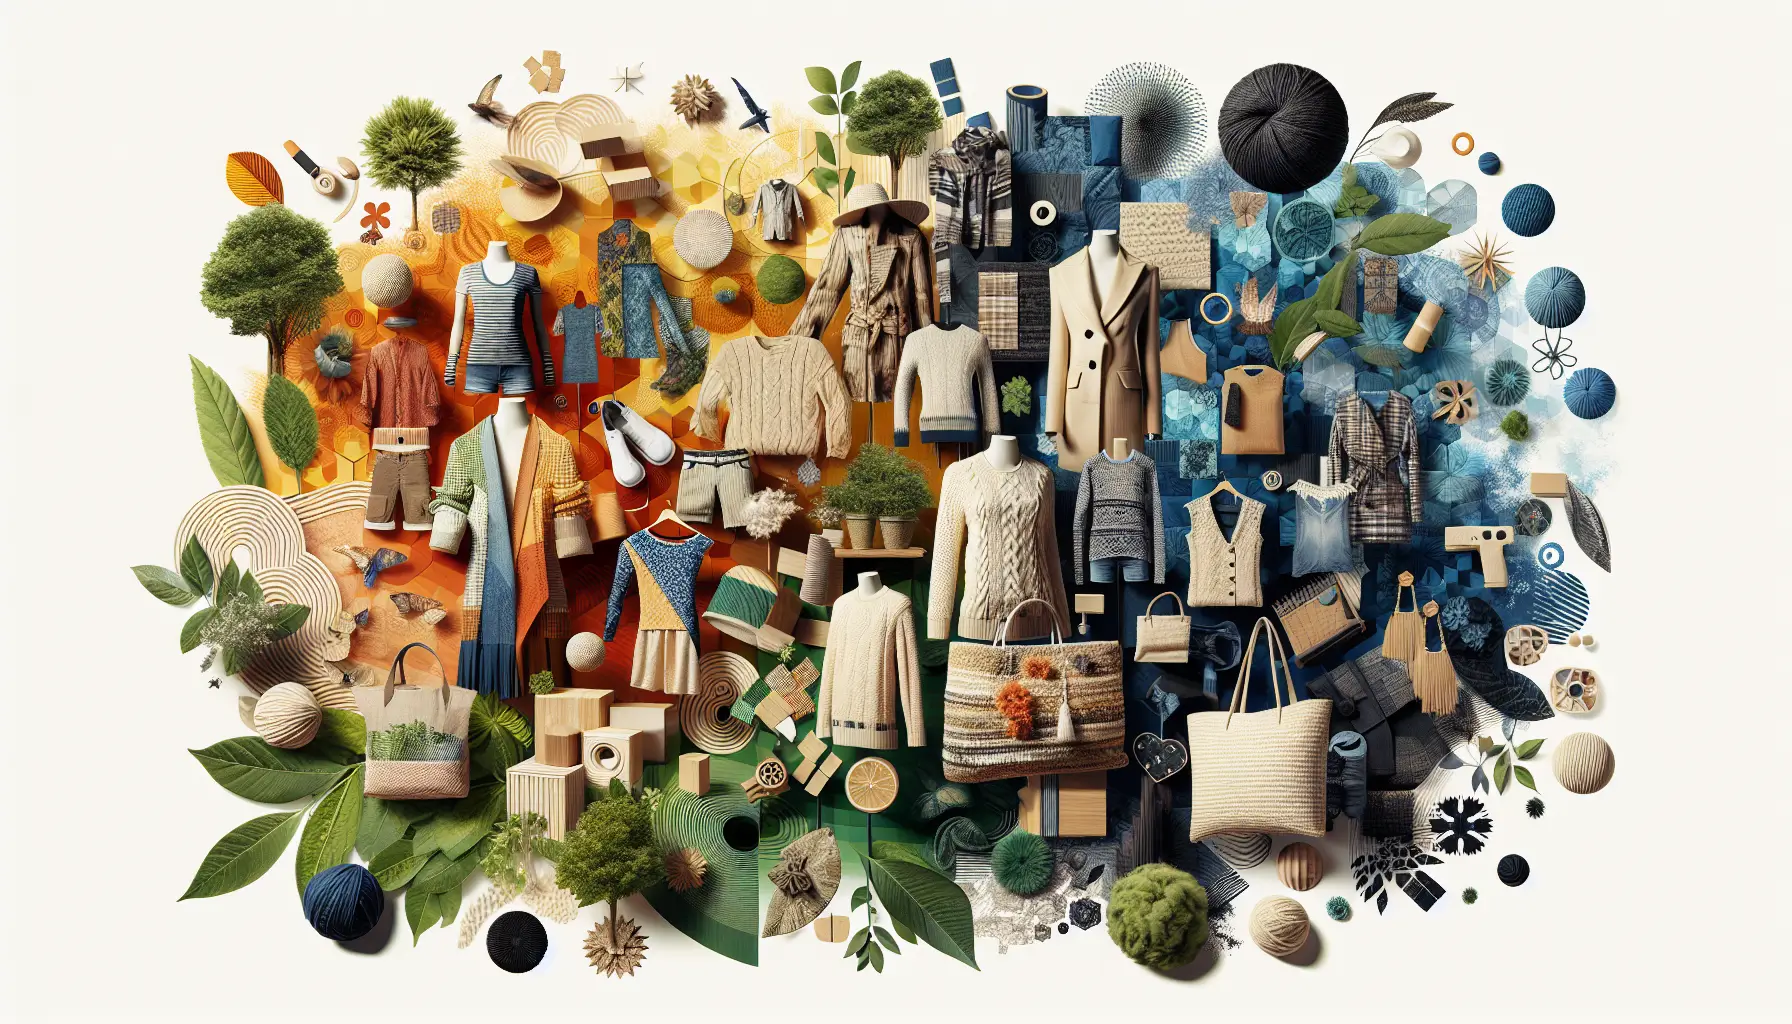 Seasonal Guide to Sustainable Fashion: Consider a vibrant collage of seasonal sustainable fashion items arranged in an eye-catching and artistic manner. Incorporate elements like eco-friendly fabrics, nature-inspired colors, and stylish accessories to visually convey the essence of the article without using text or faces.